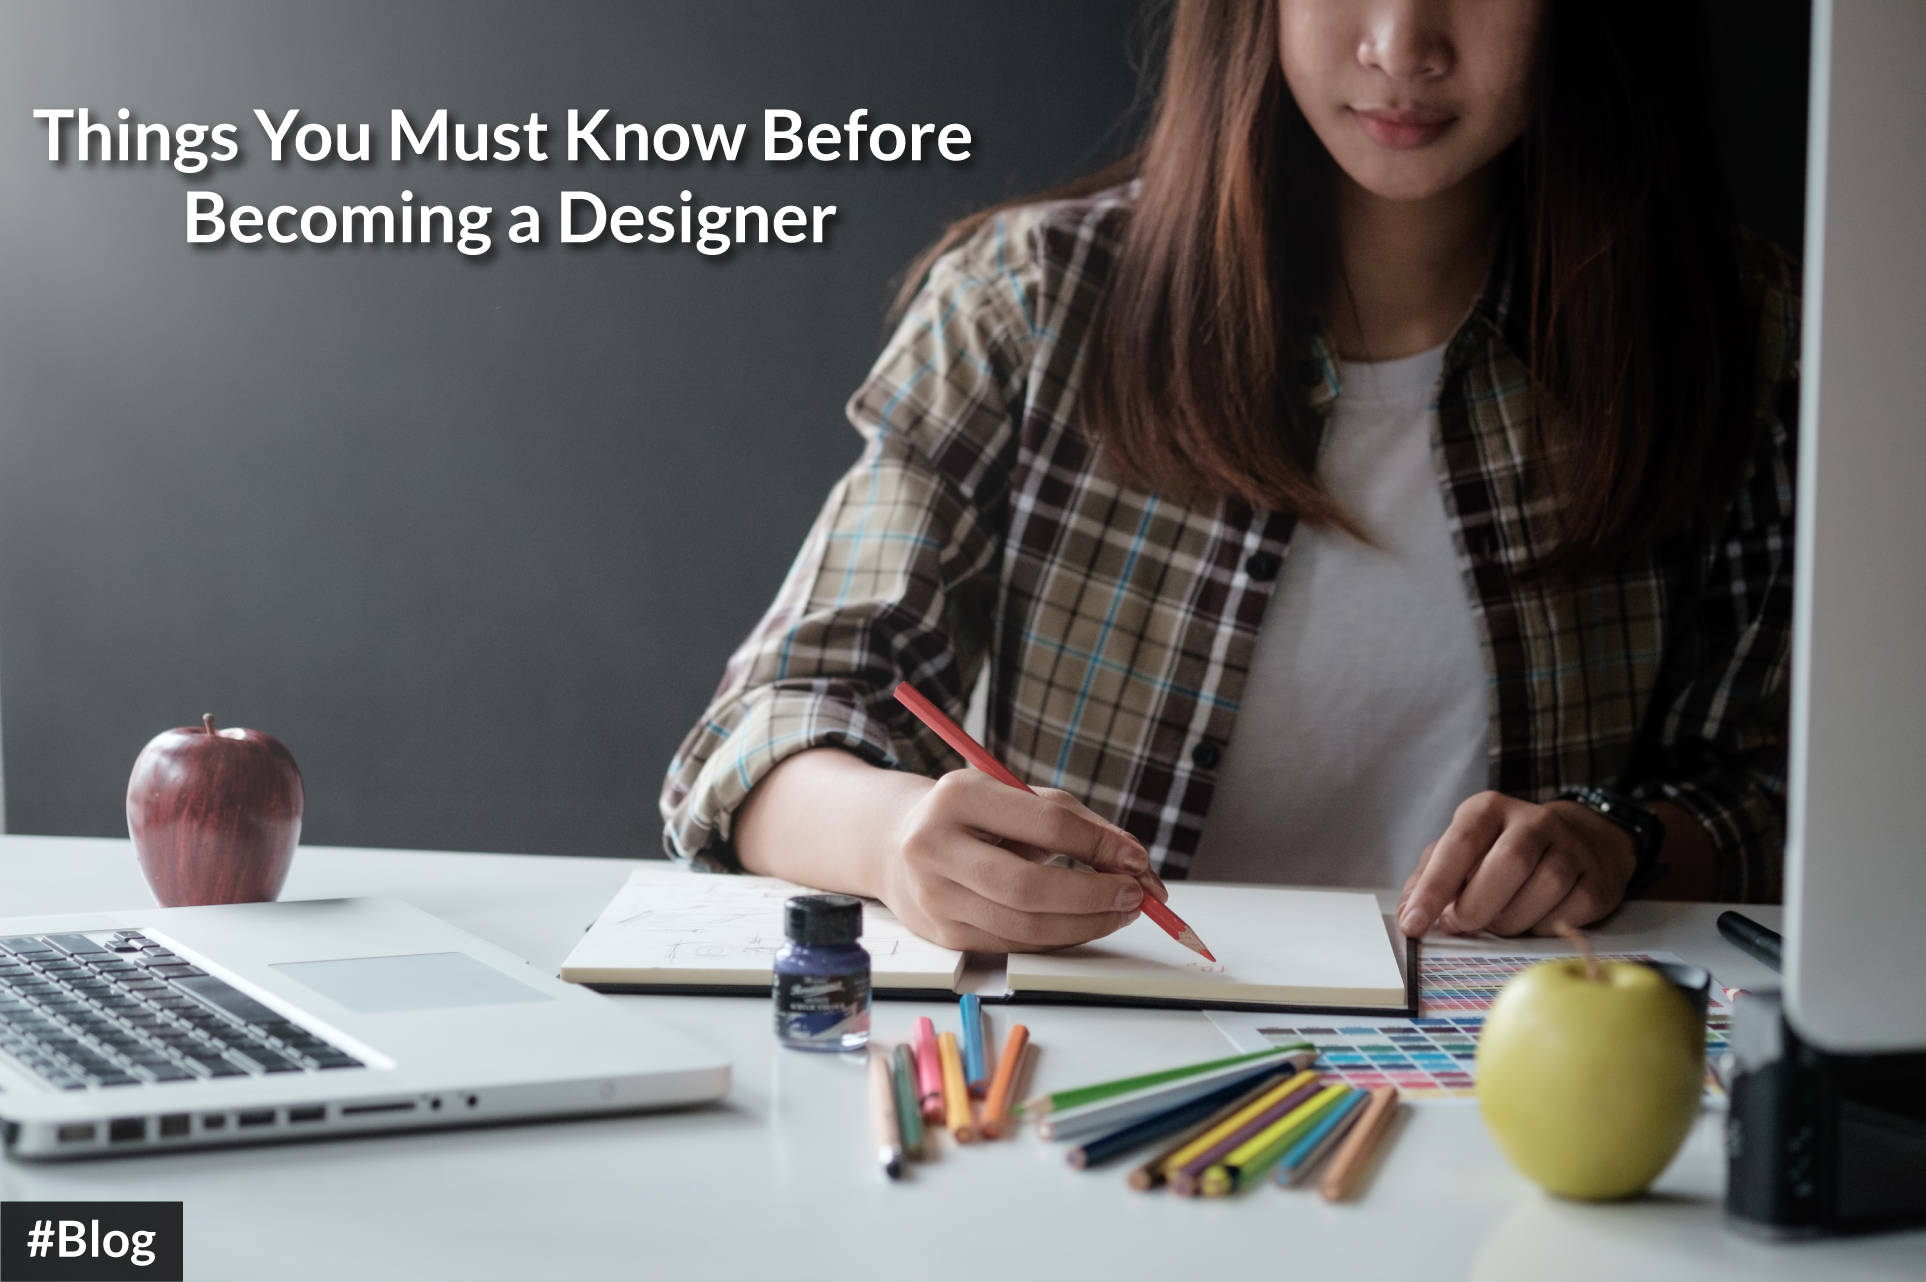 Things You Must Know Before Becoming a Designer